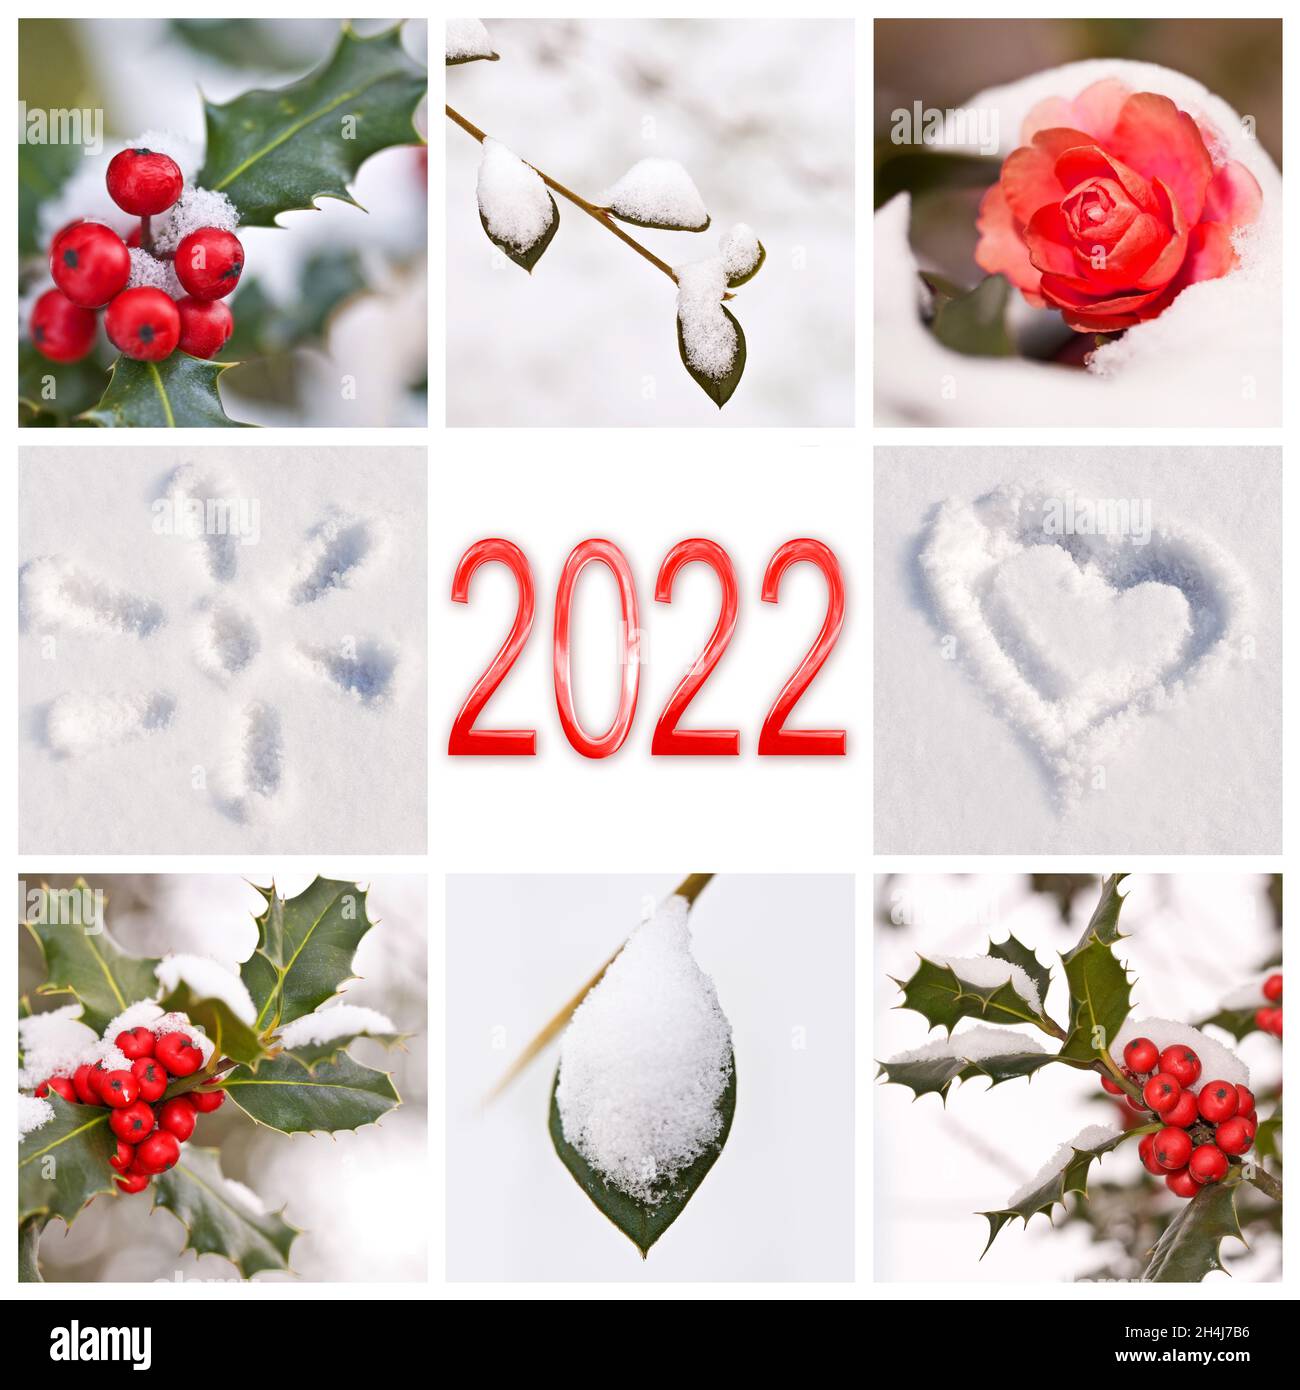 2022, snow and winter red and white nature photos collage, new year greeting card Stock Photo